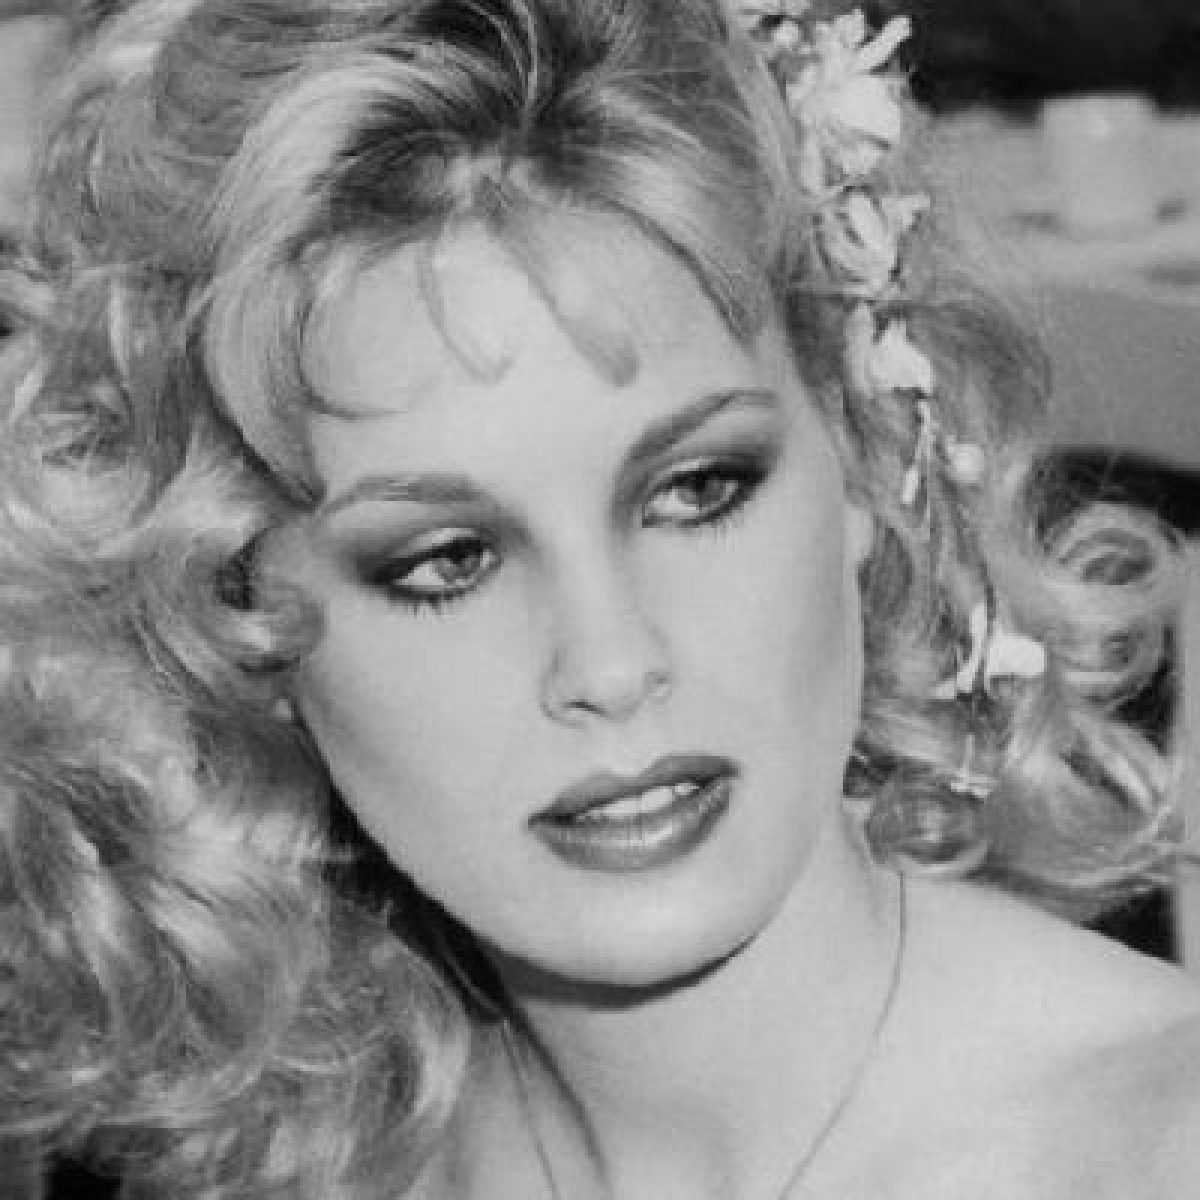 Dorothy stratten playboy pictures